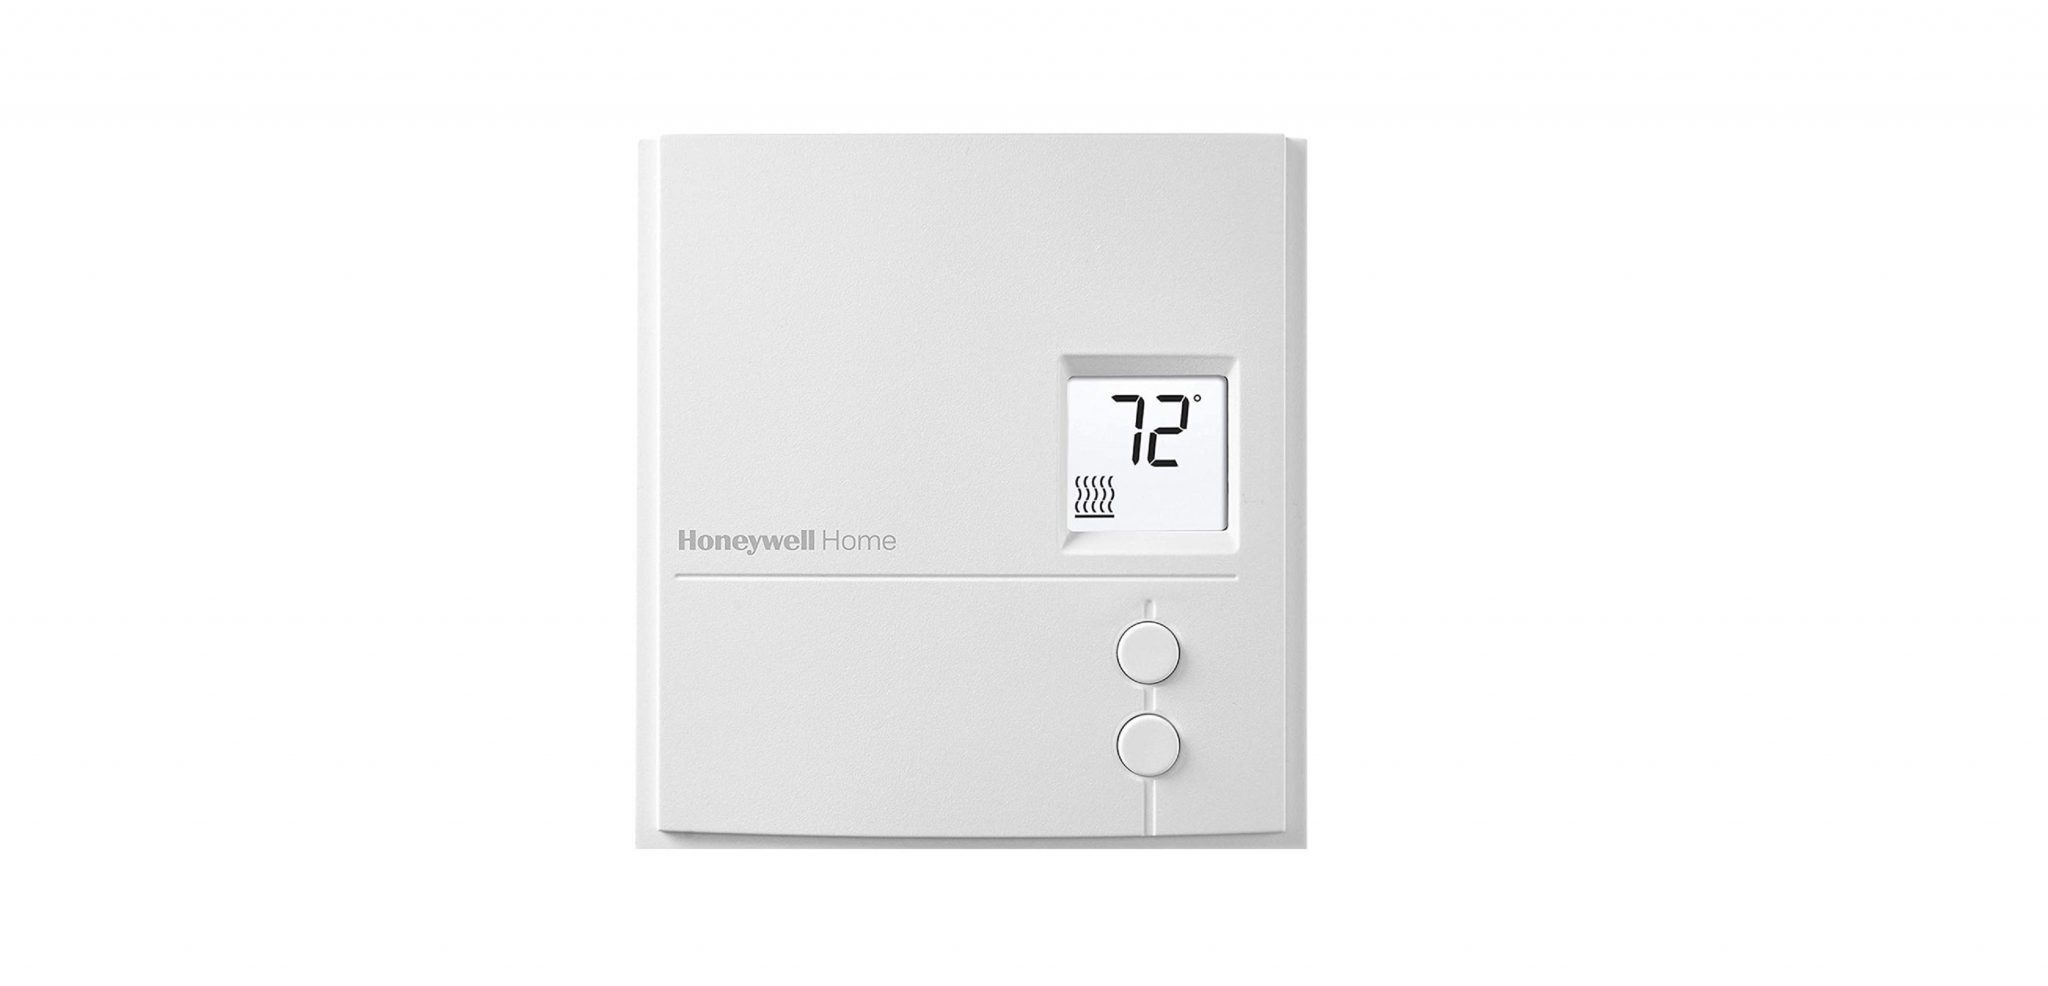 RLV3150 Electric Thermostat